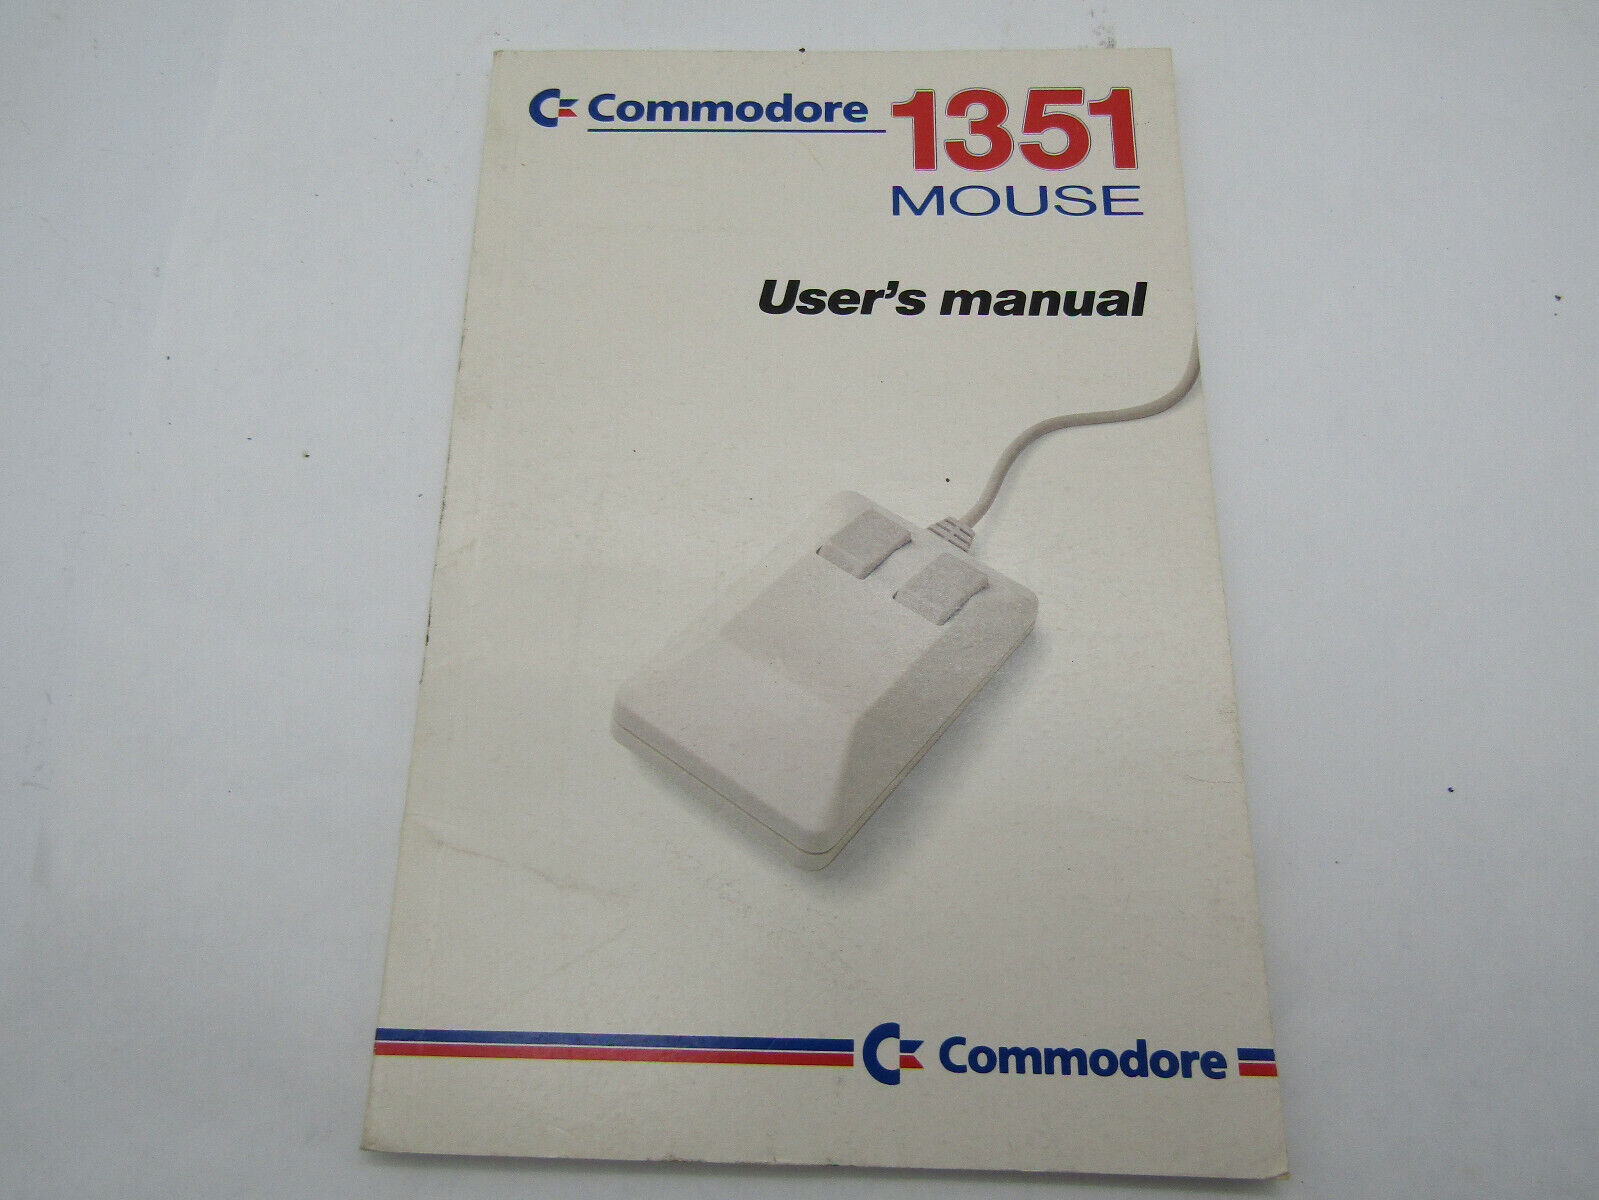 Vintage 1986 Commodore 1351 Mouse user's manual computer publication 